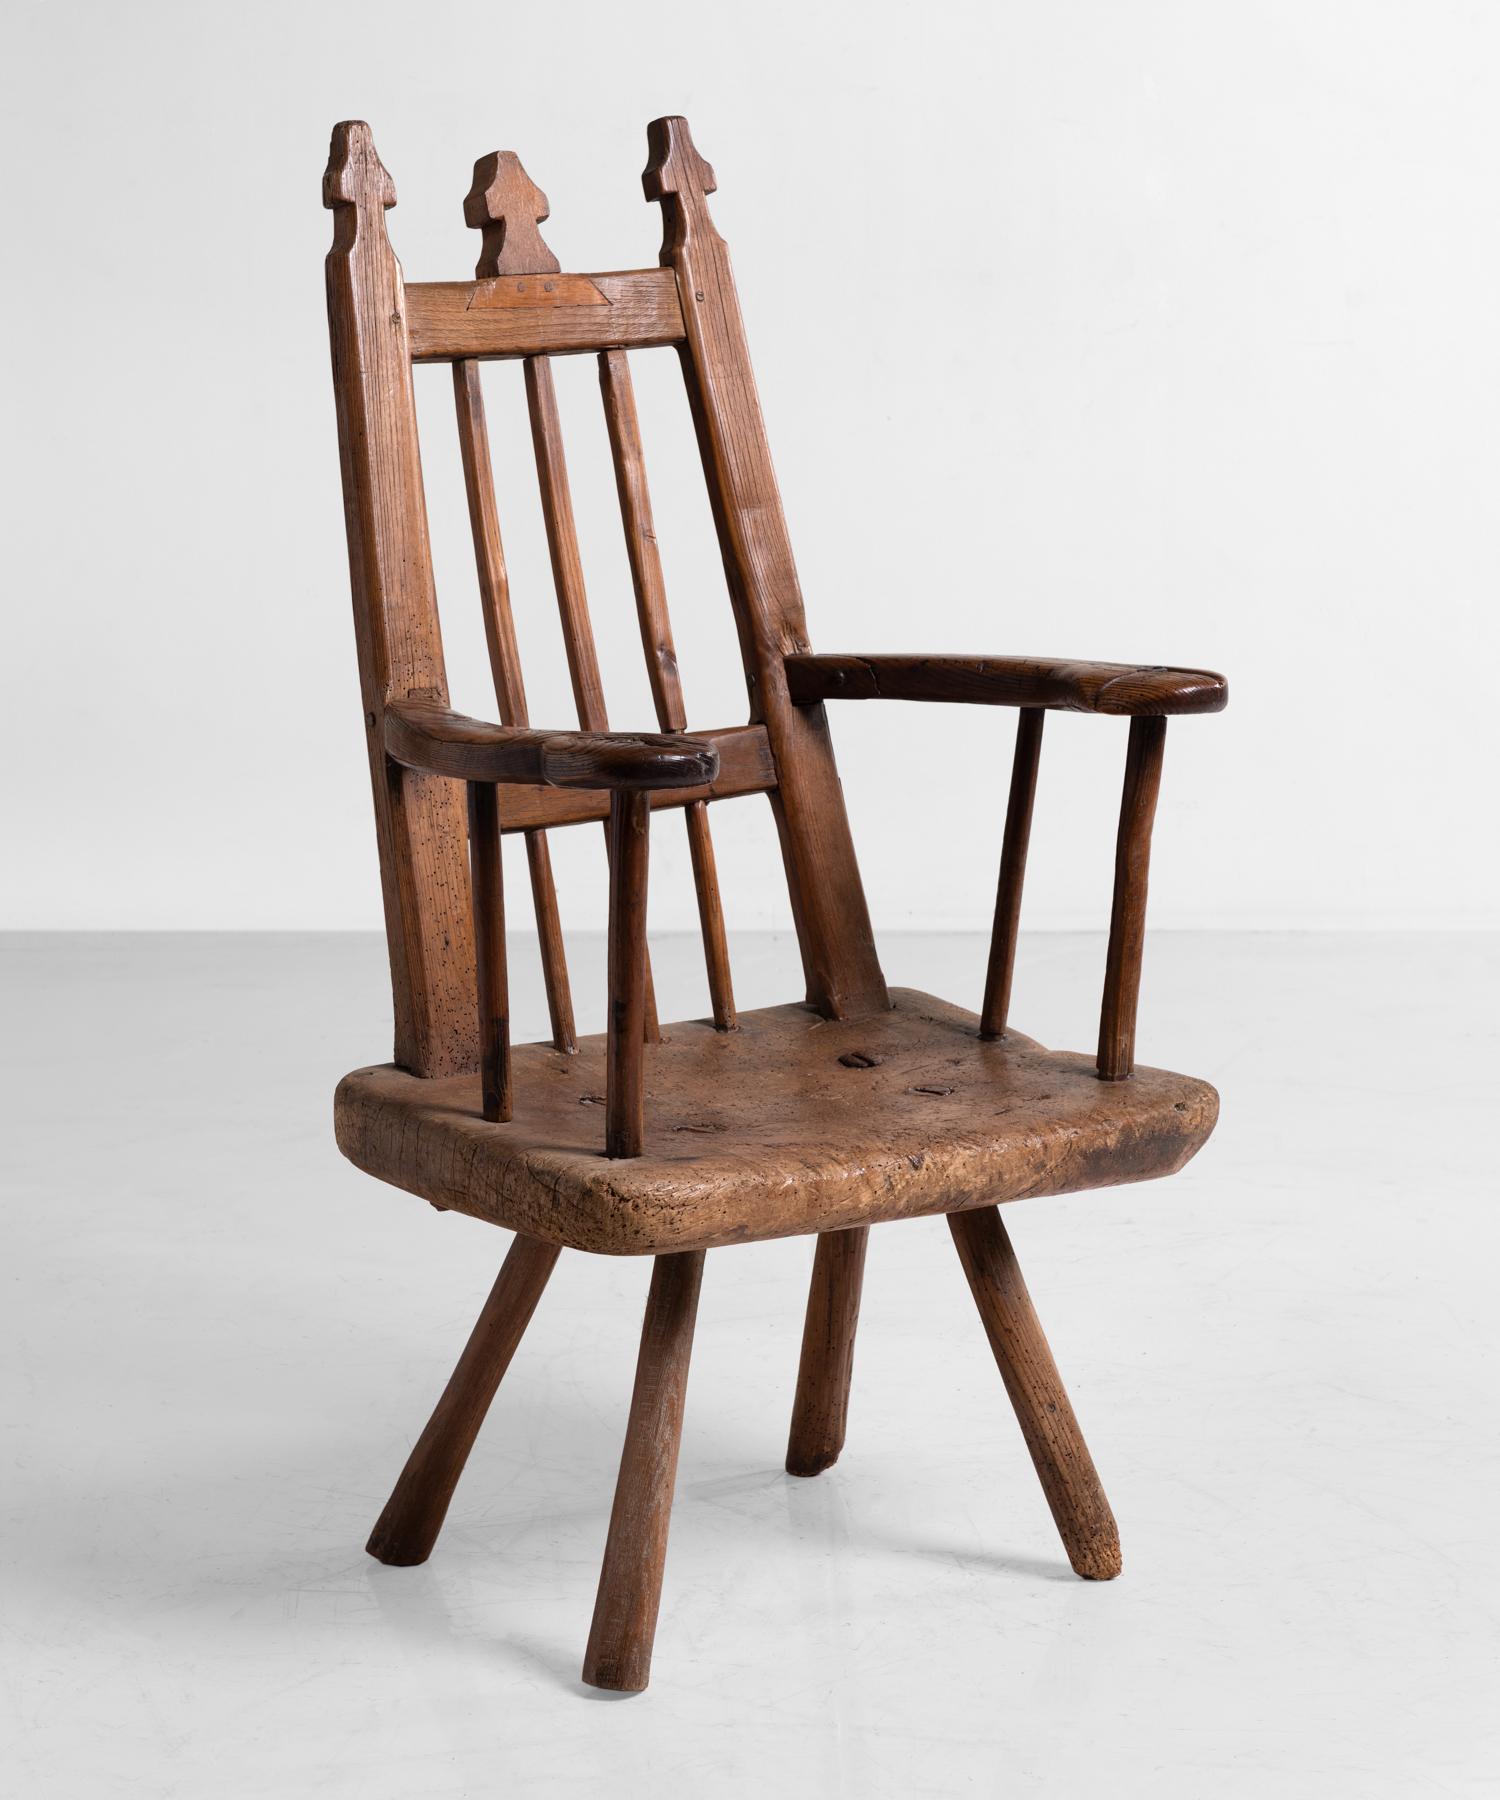 Primitive wooden armchair, England, circa 1820.

Unusual high back chair in ash and oak with shaped finials and six straight spindles on a slab seat.